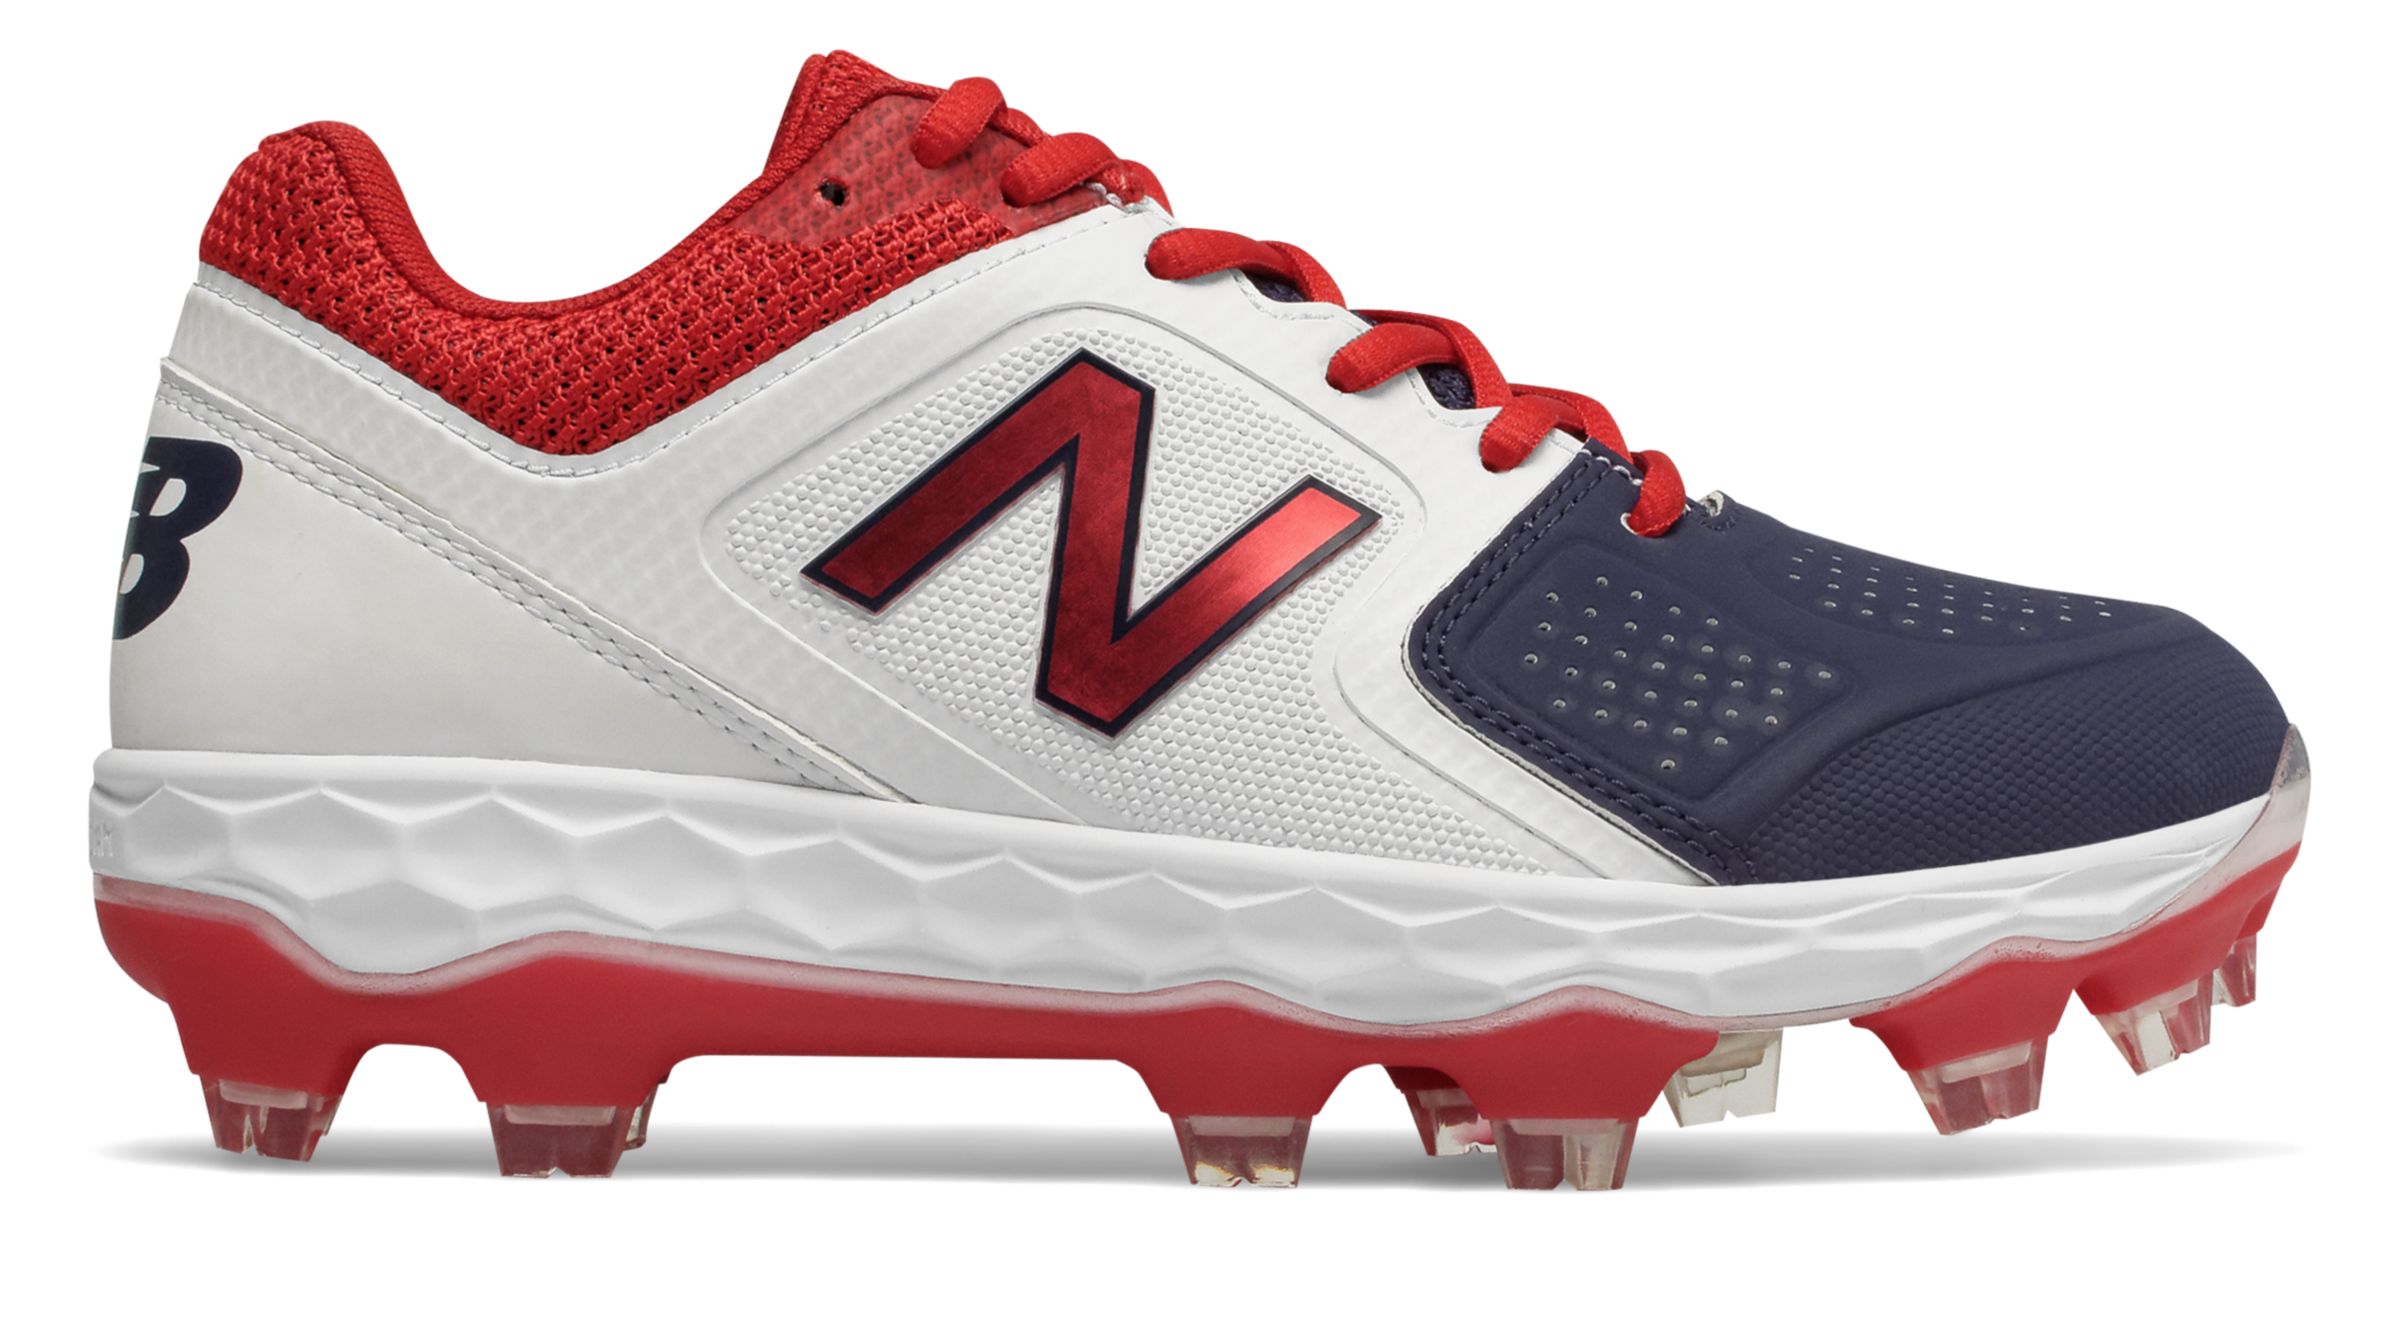 Softball Turf Shoes & Cleats for Women - New Balance